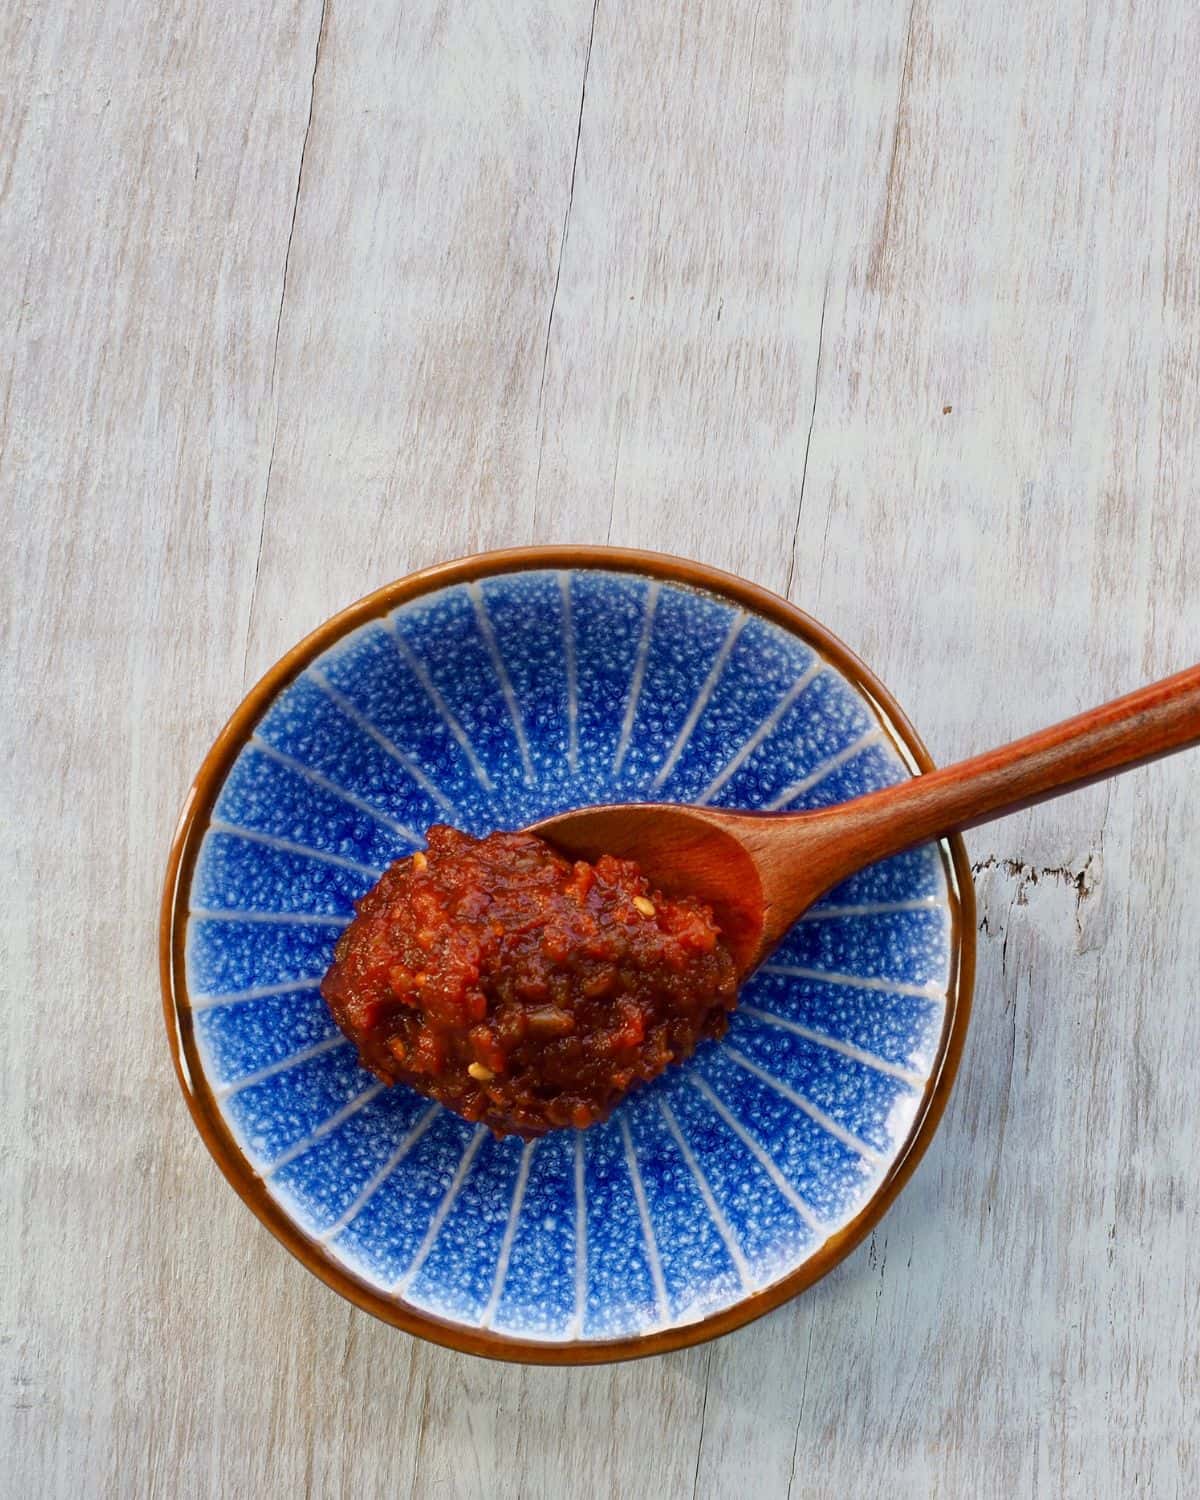 A bowl with a wooden spoon in it filled with ssamjang paste.